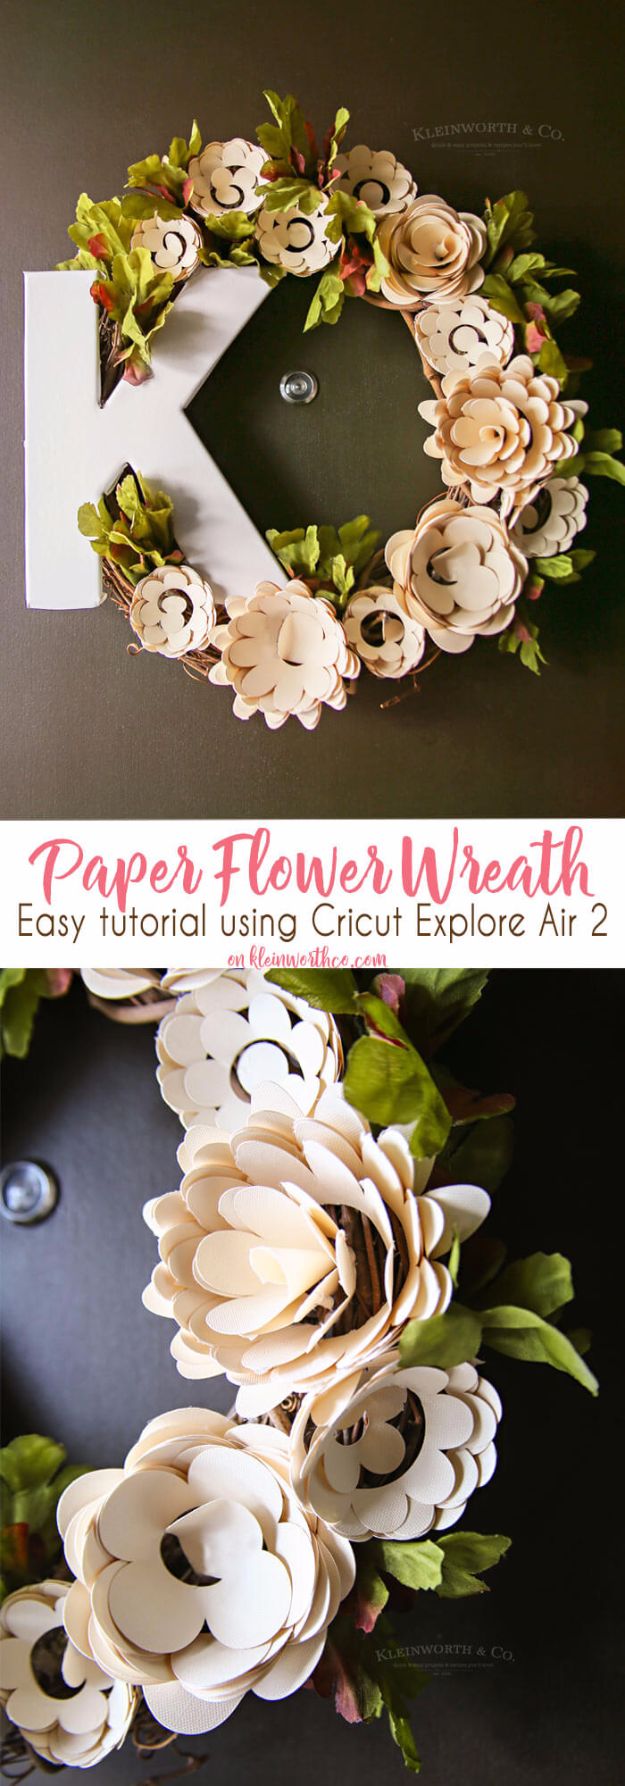 DIY Paper Flowers For Your Room - Paper Flower Wreath Cricut - How To Make A Paper Flower - Large Wedding Backdrop for Wall Decor - Easy Tissue Paper Flower Tutorial for Kids - Giant Projects for Photo Backdrops - Daisy, Roses, Bouquets, Centerpieces - Cricut Template and Step by Step Tutorial #papercrafts #paperflowers #teencrafts